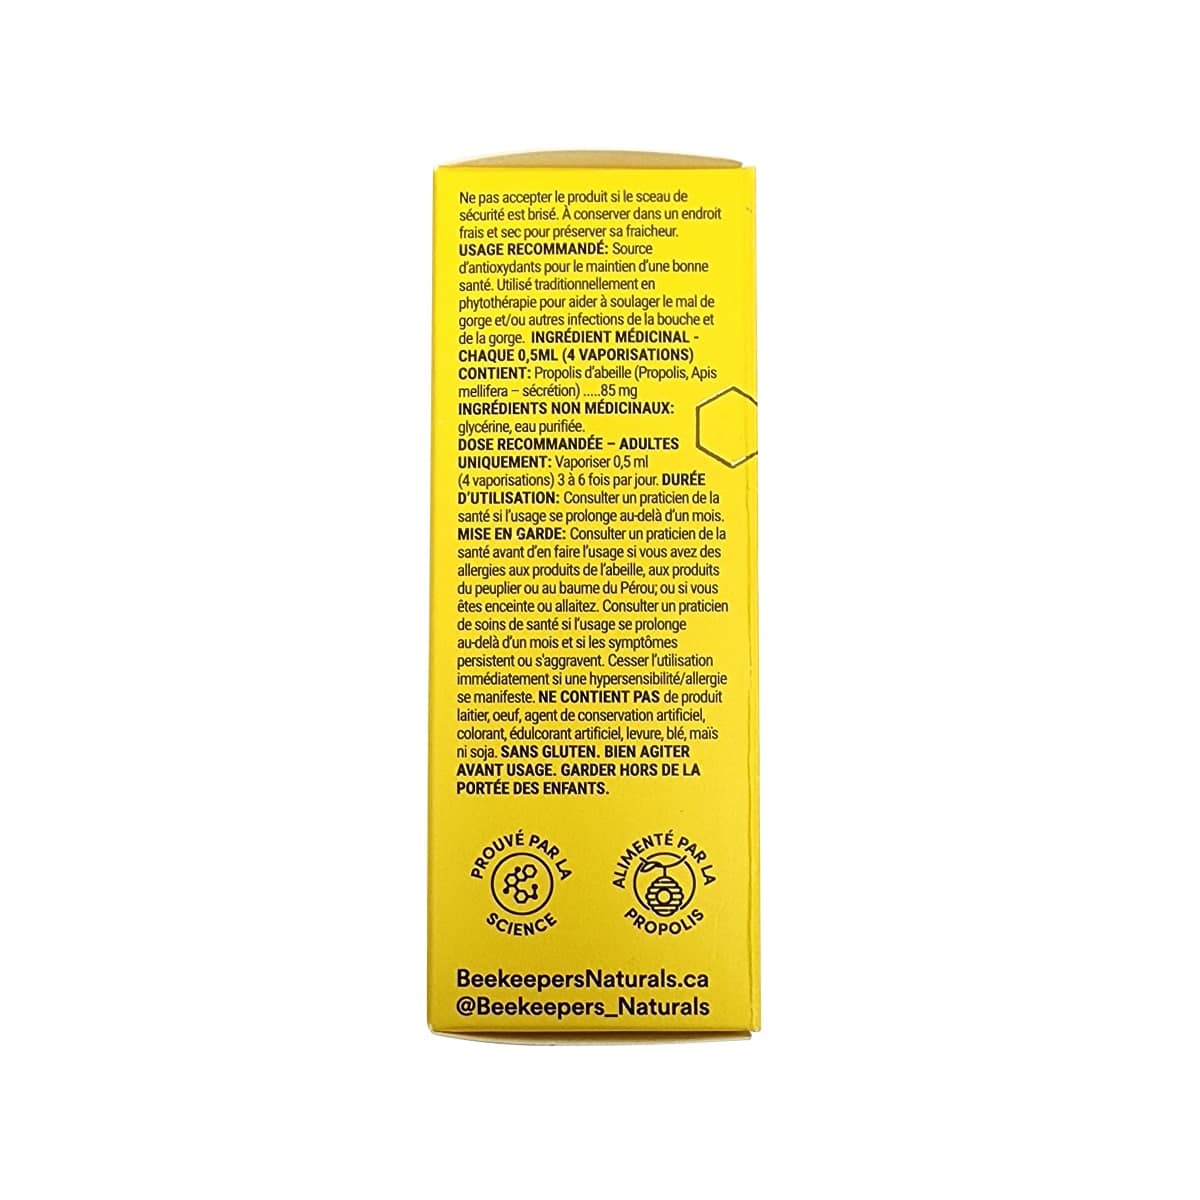 Uses, Ingredients, Dose, Cautions for Beekeeper's Naturals Propolis Throat Spray (30 mL) in French